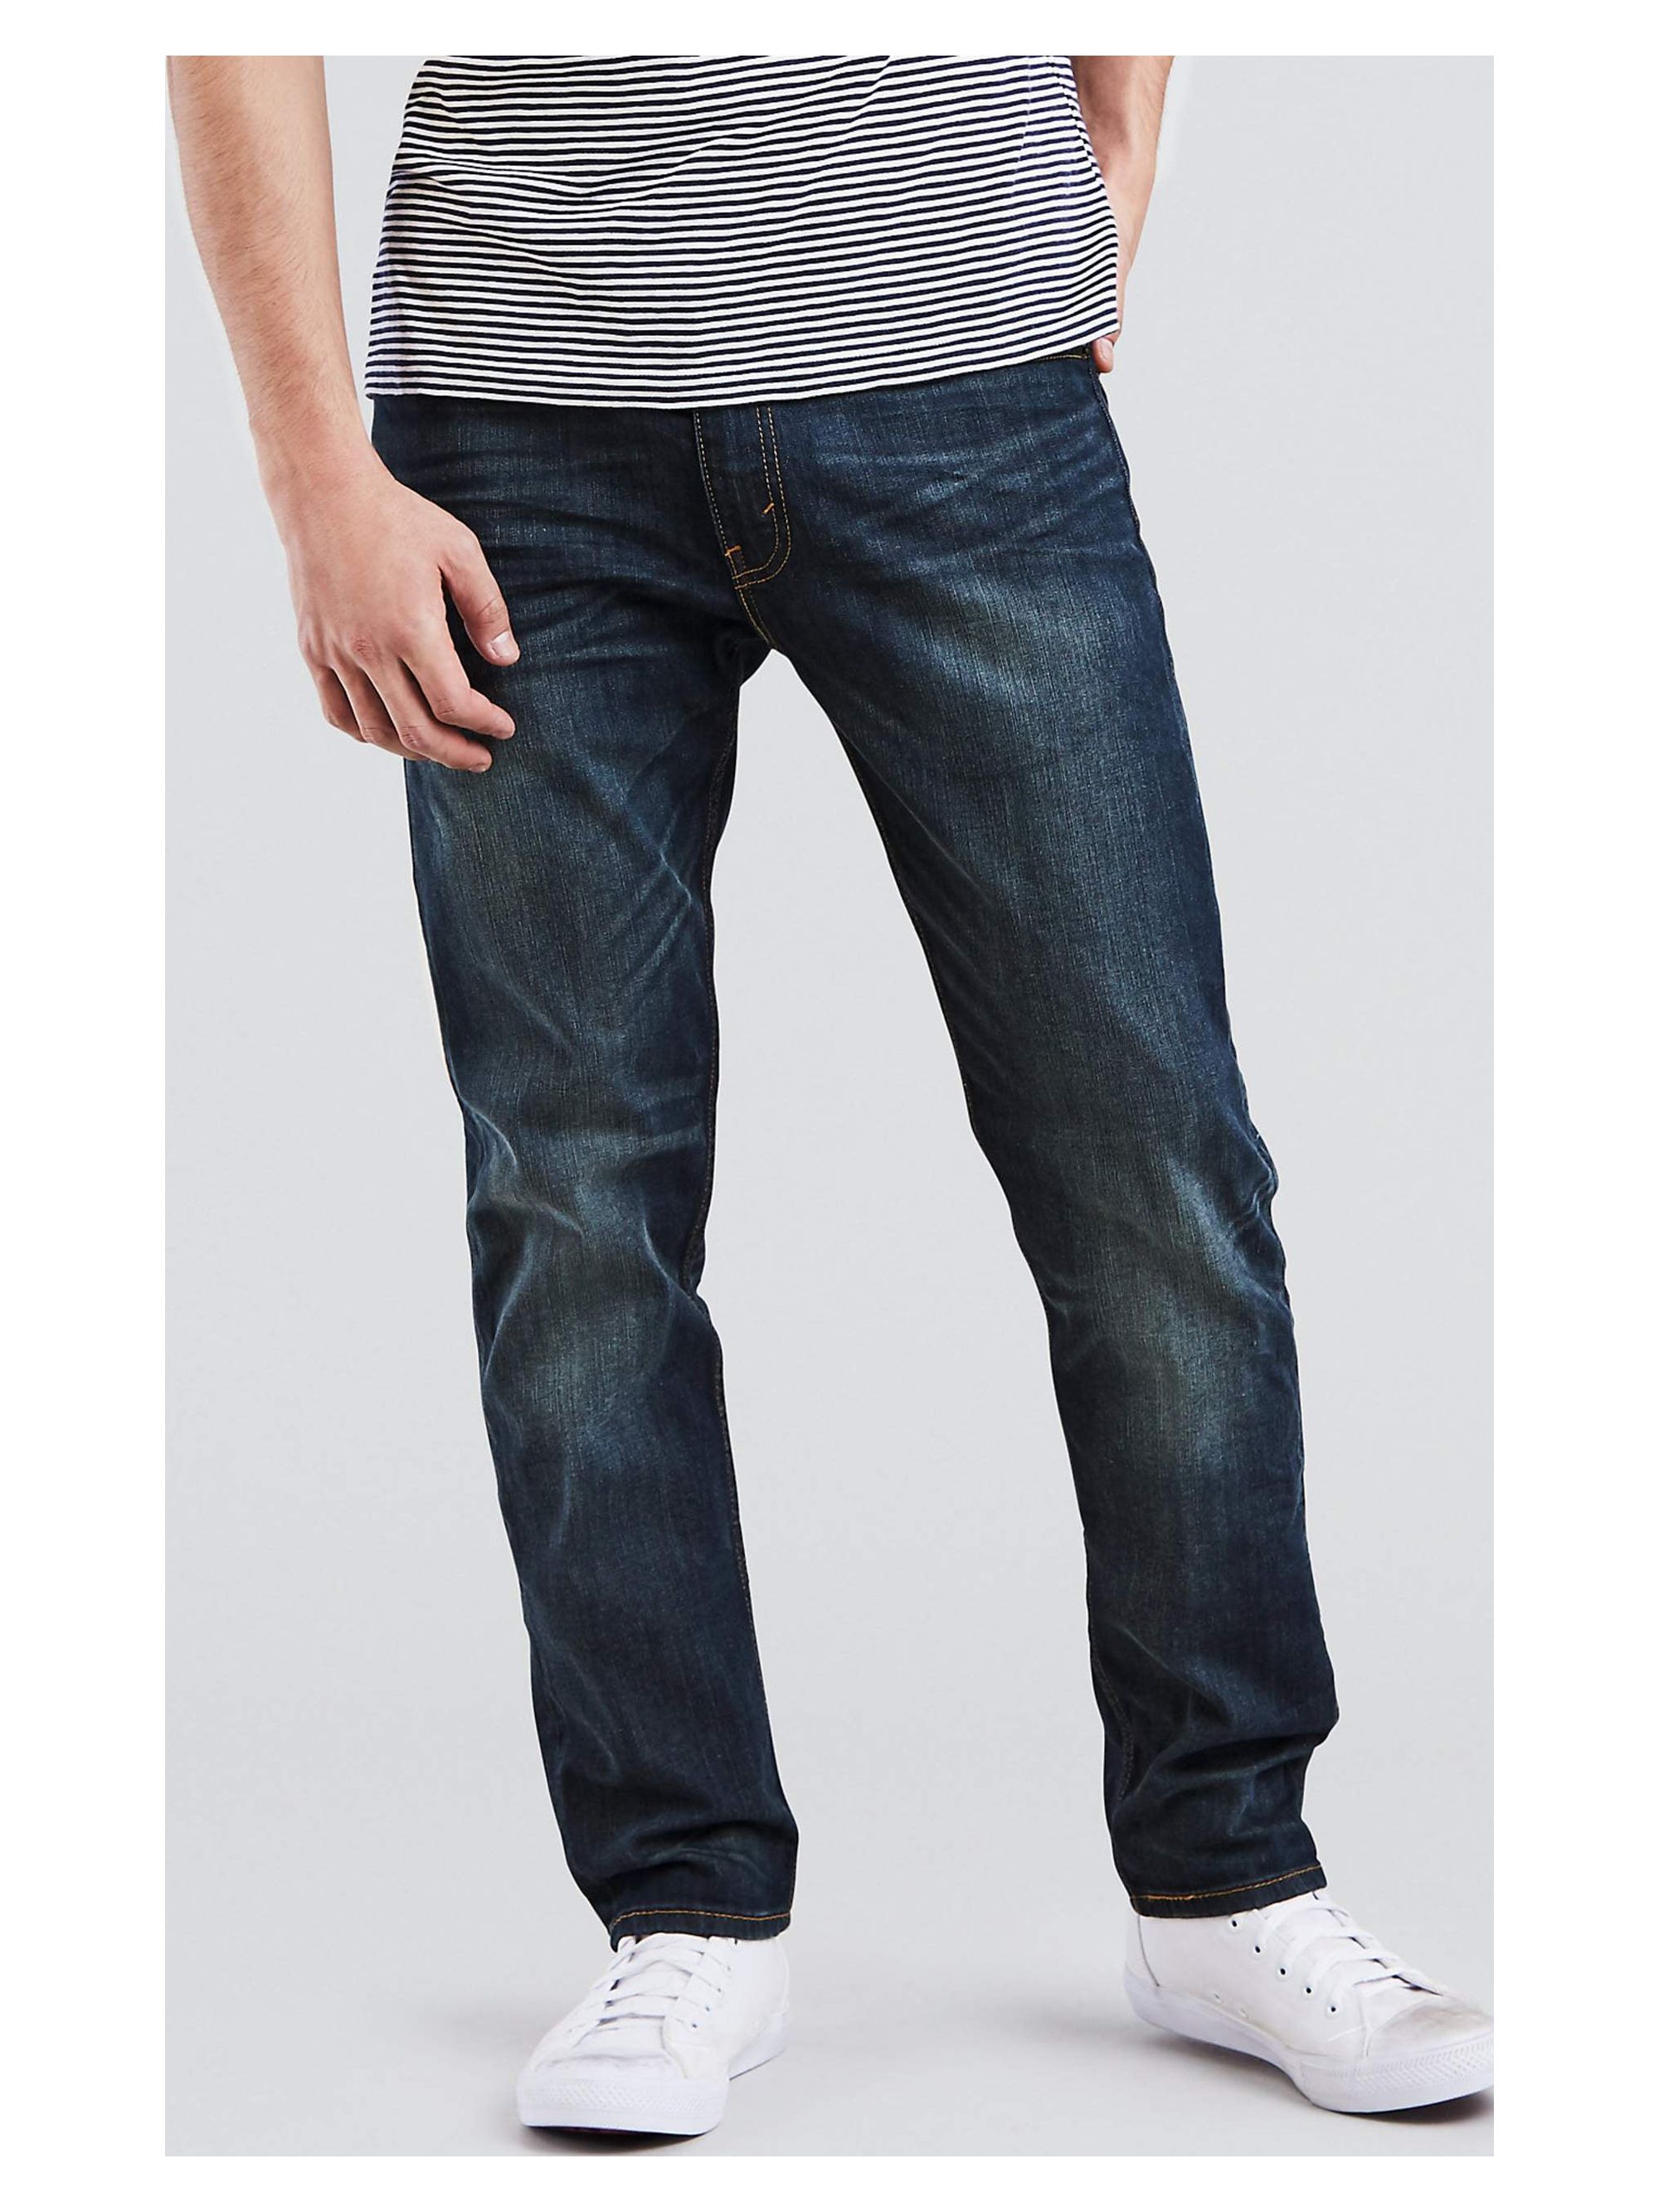 Levi's Mens 502 Regular Fit Stretch Tapered Jeans - image 1 of 7